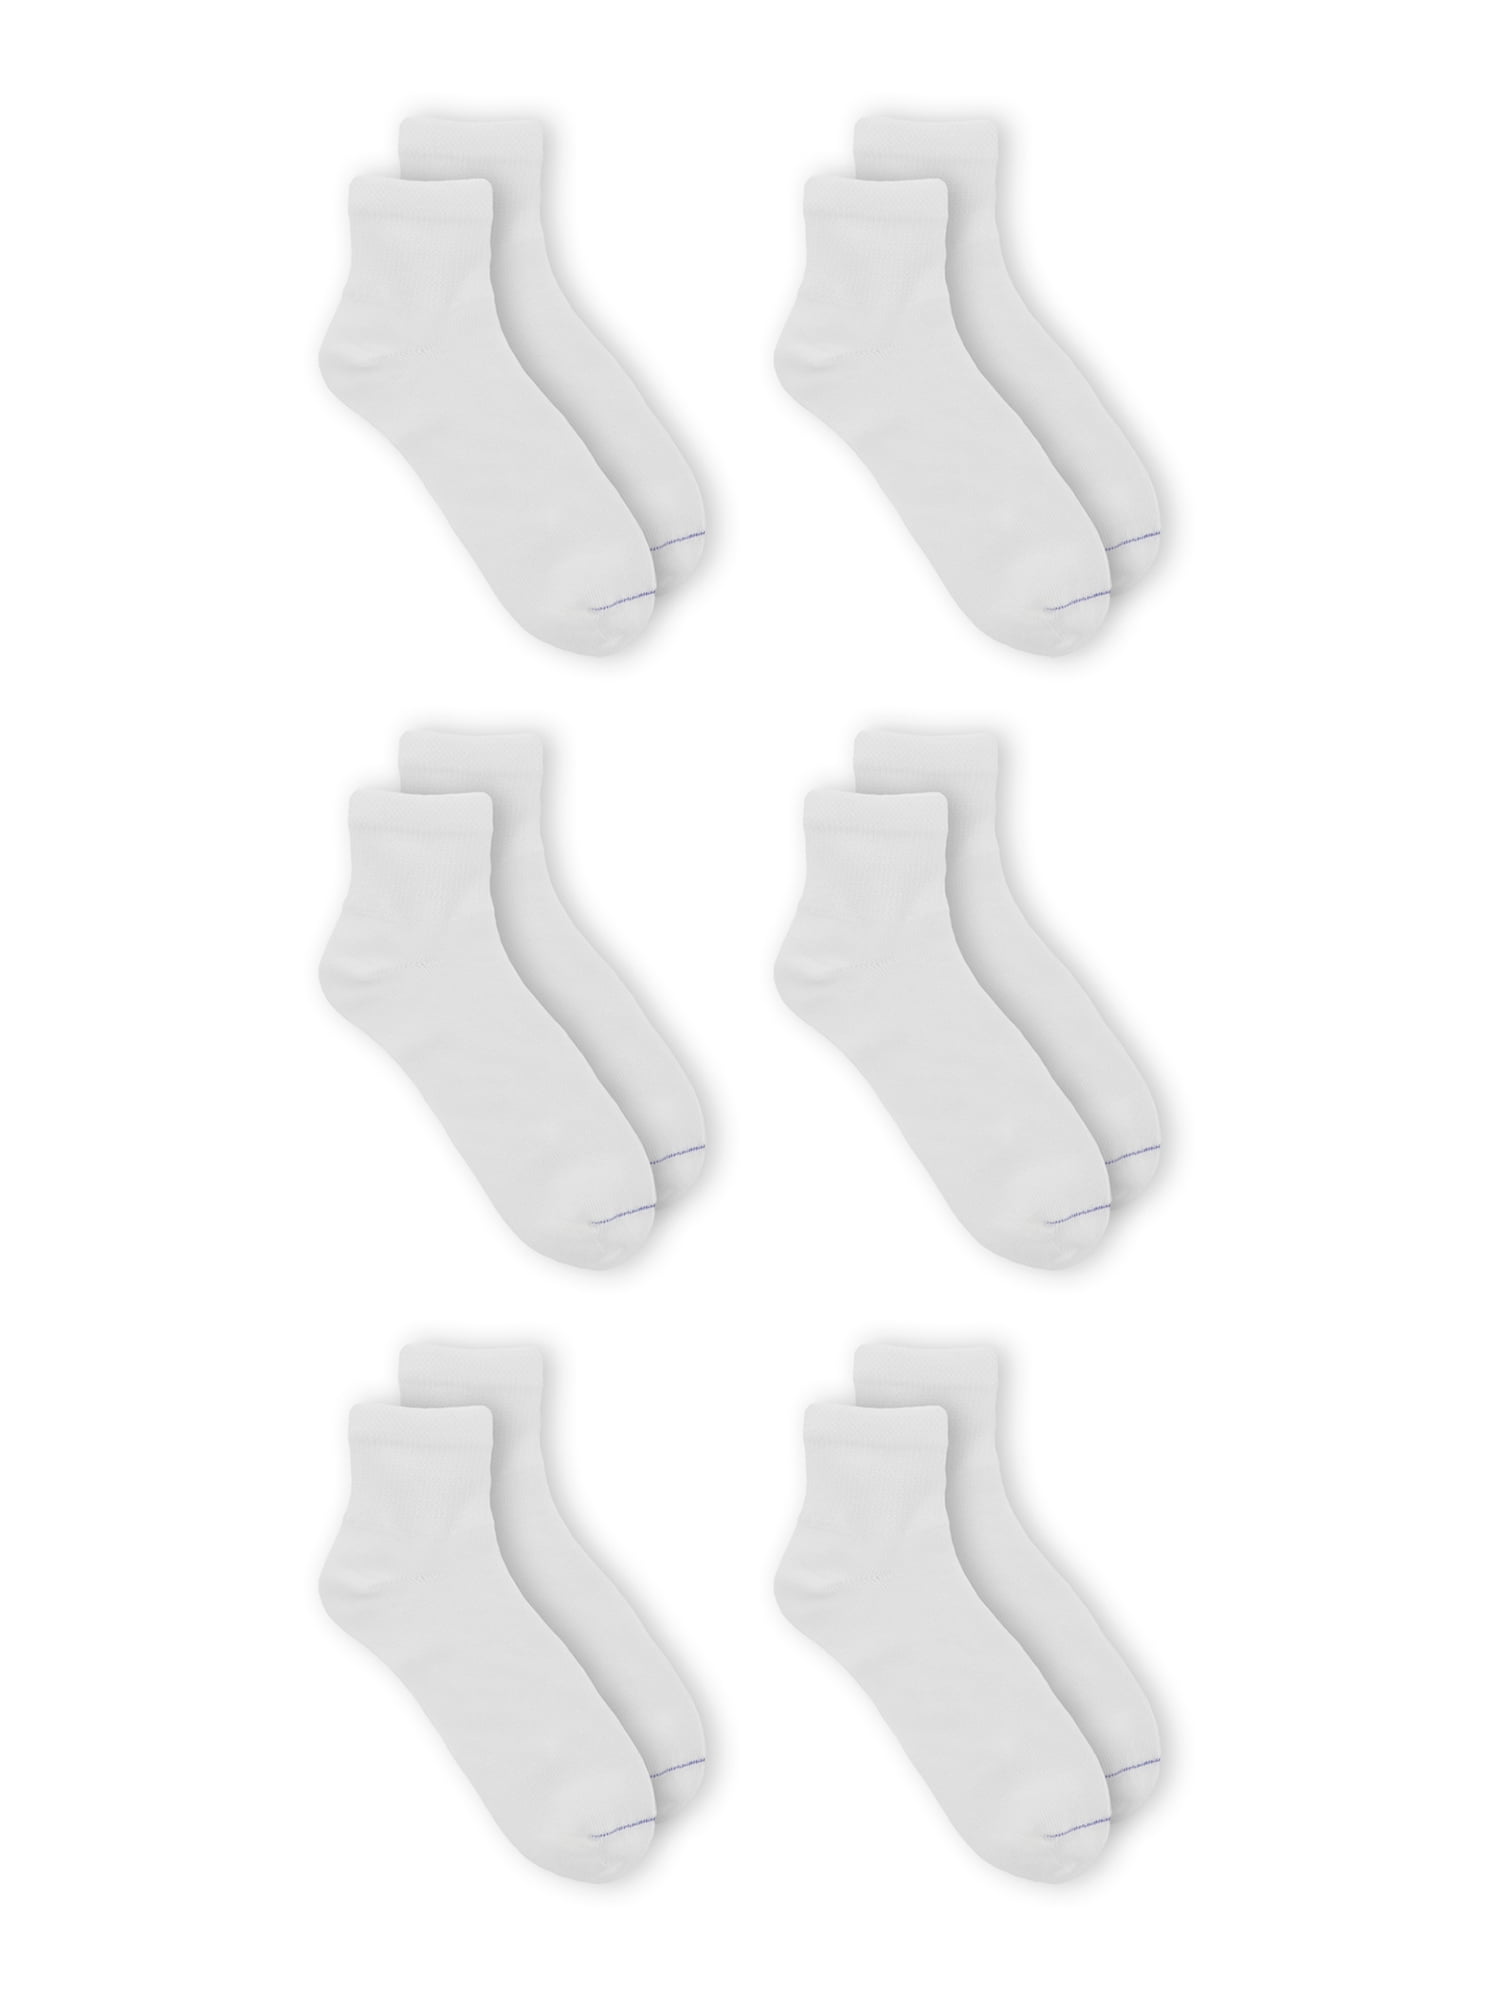 Dr. Scholl's Women's Diabetes and Circulatory Ankle Socks, 6 Pack